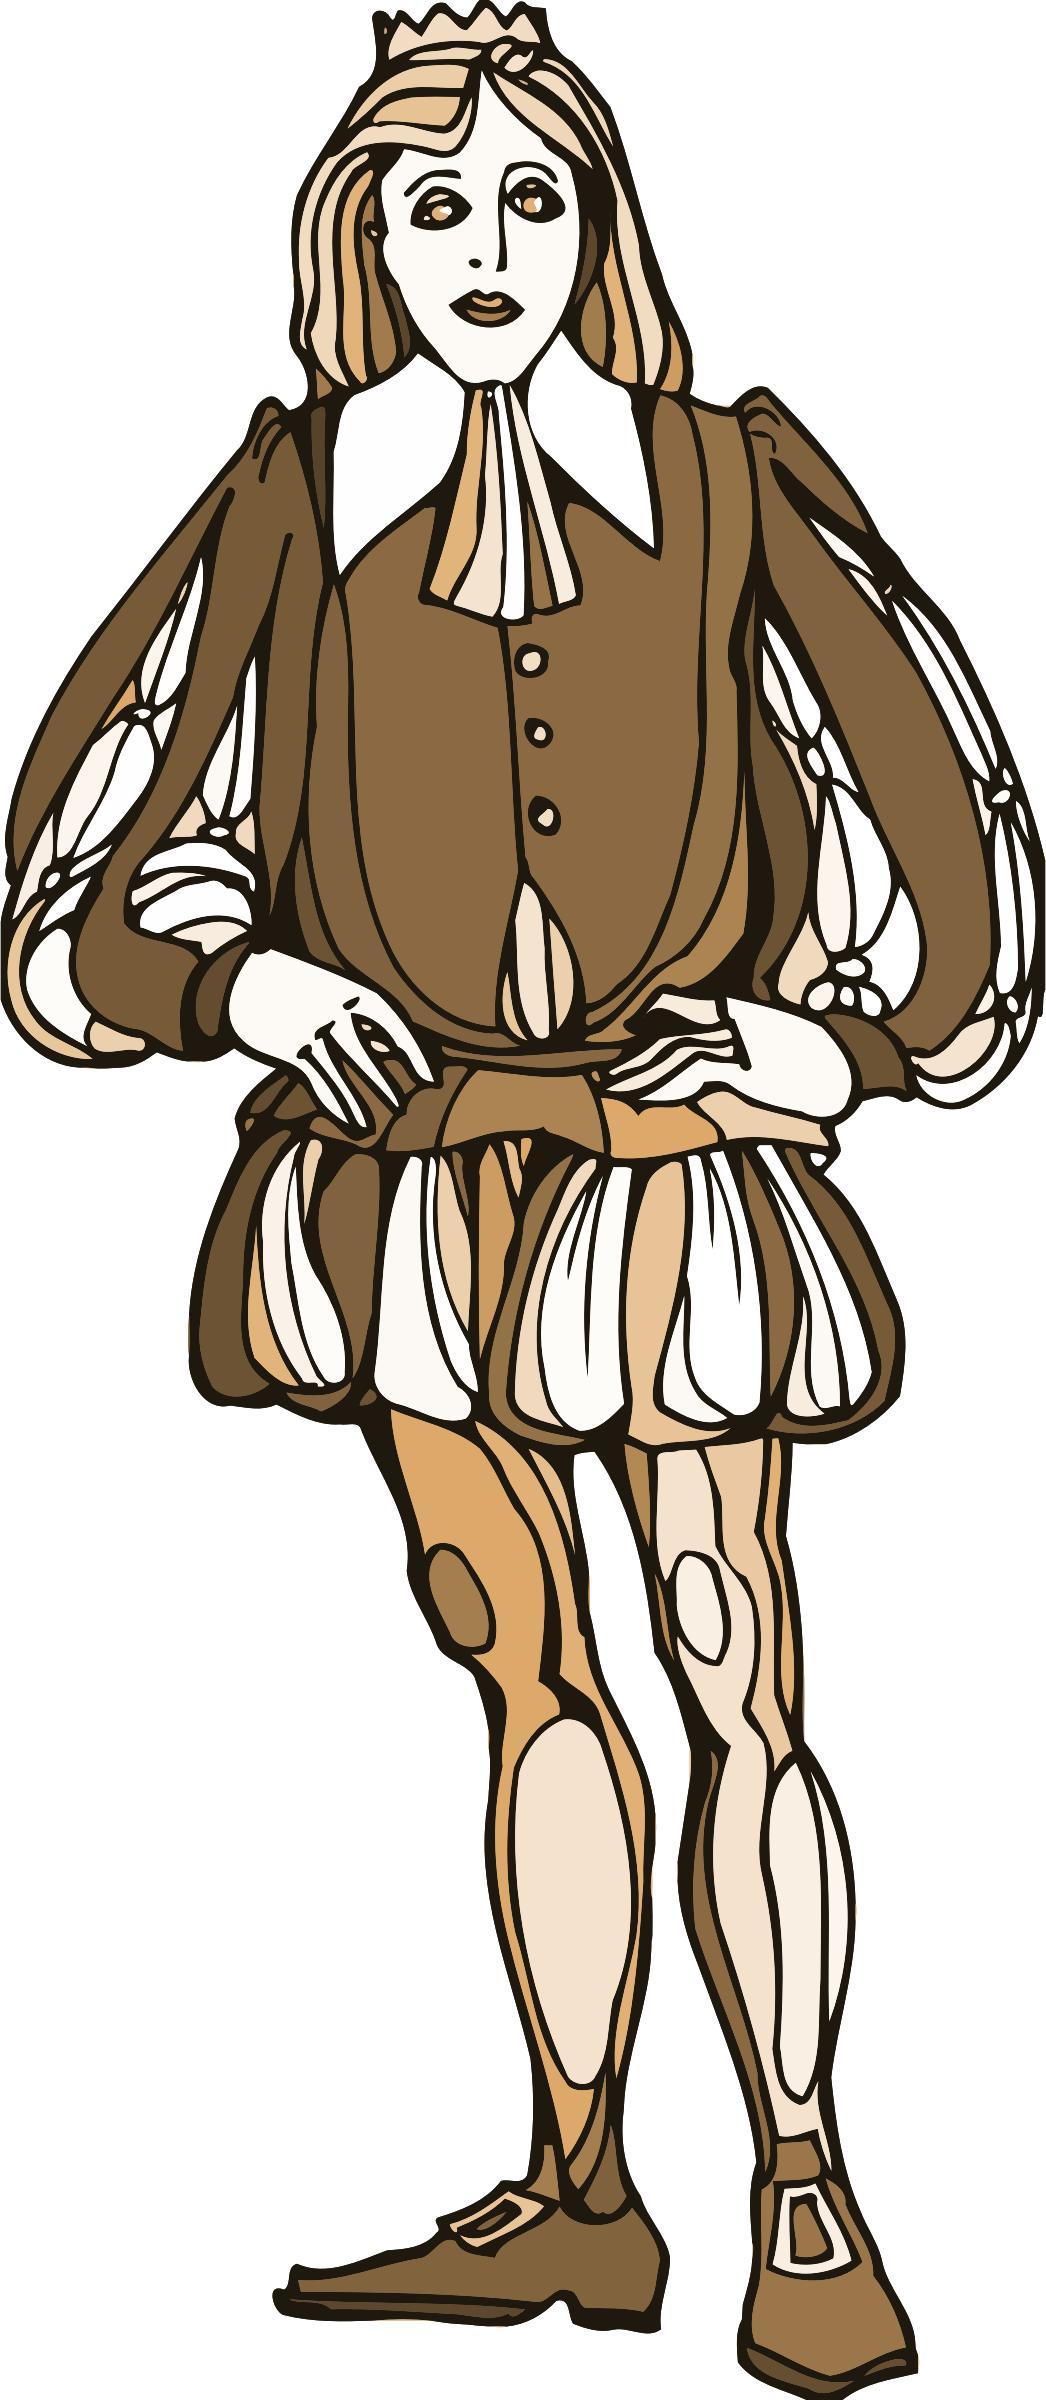 Shakespeare characters - prince png transparent